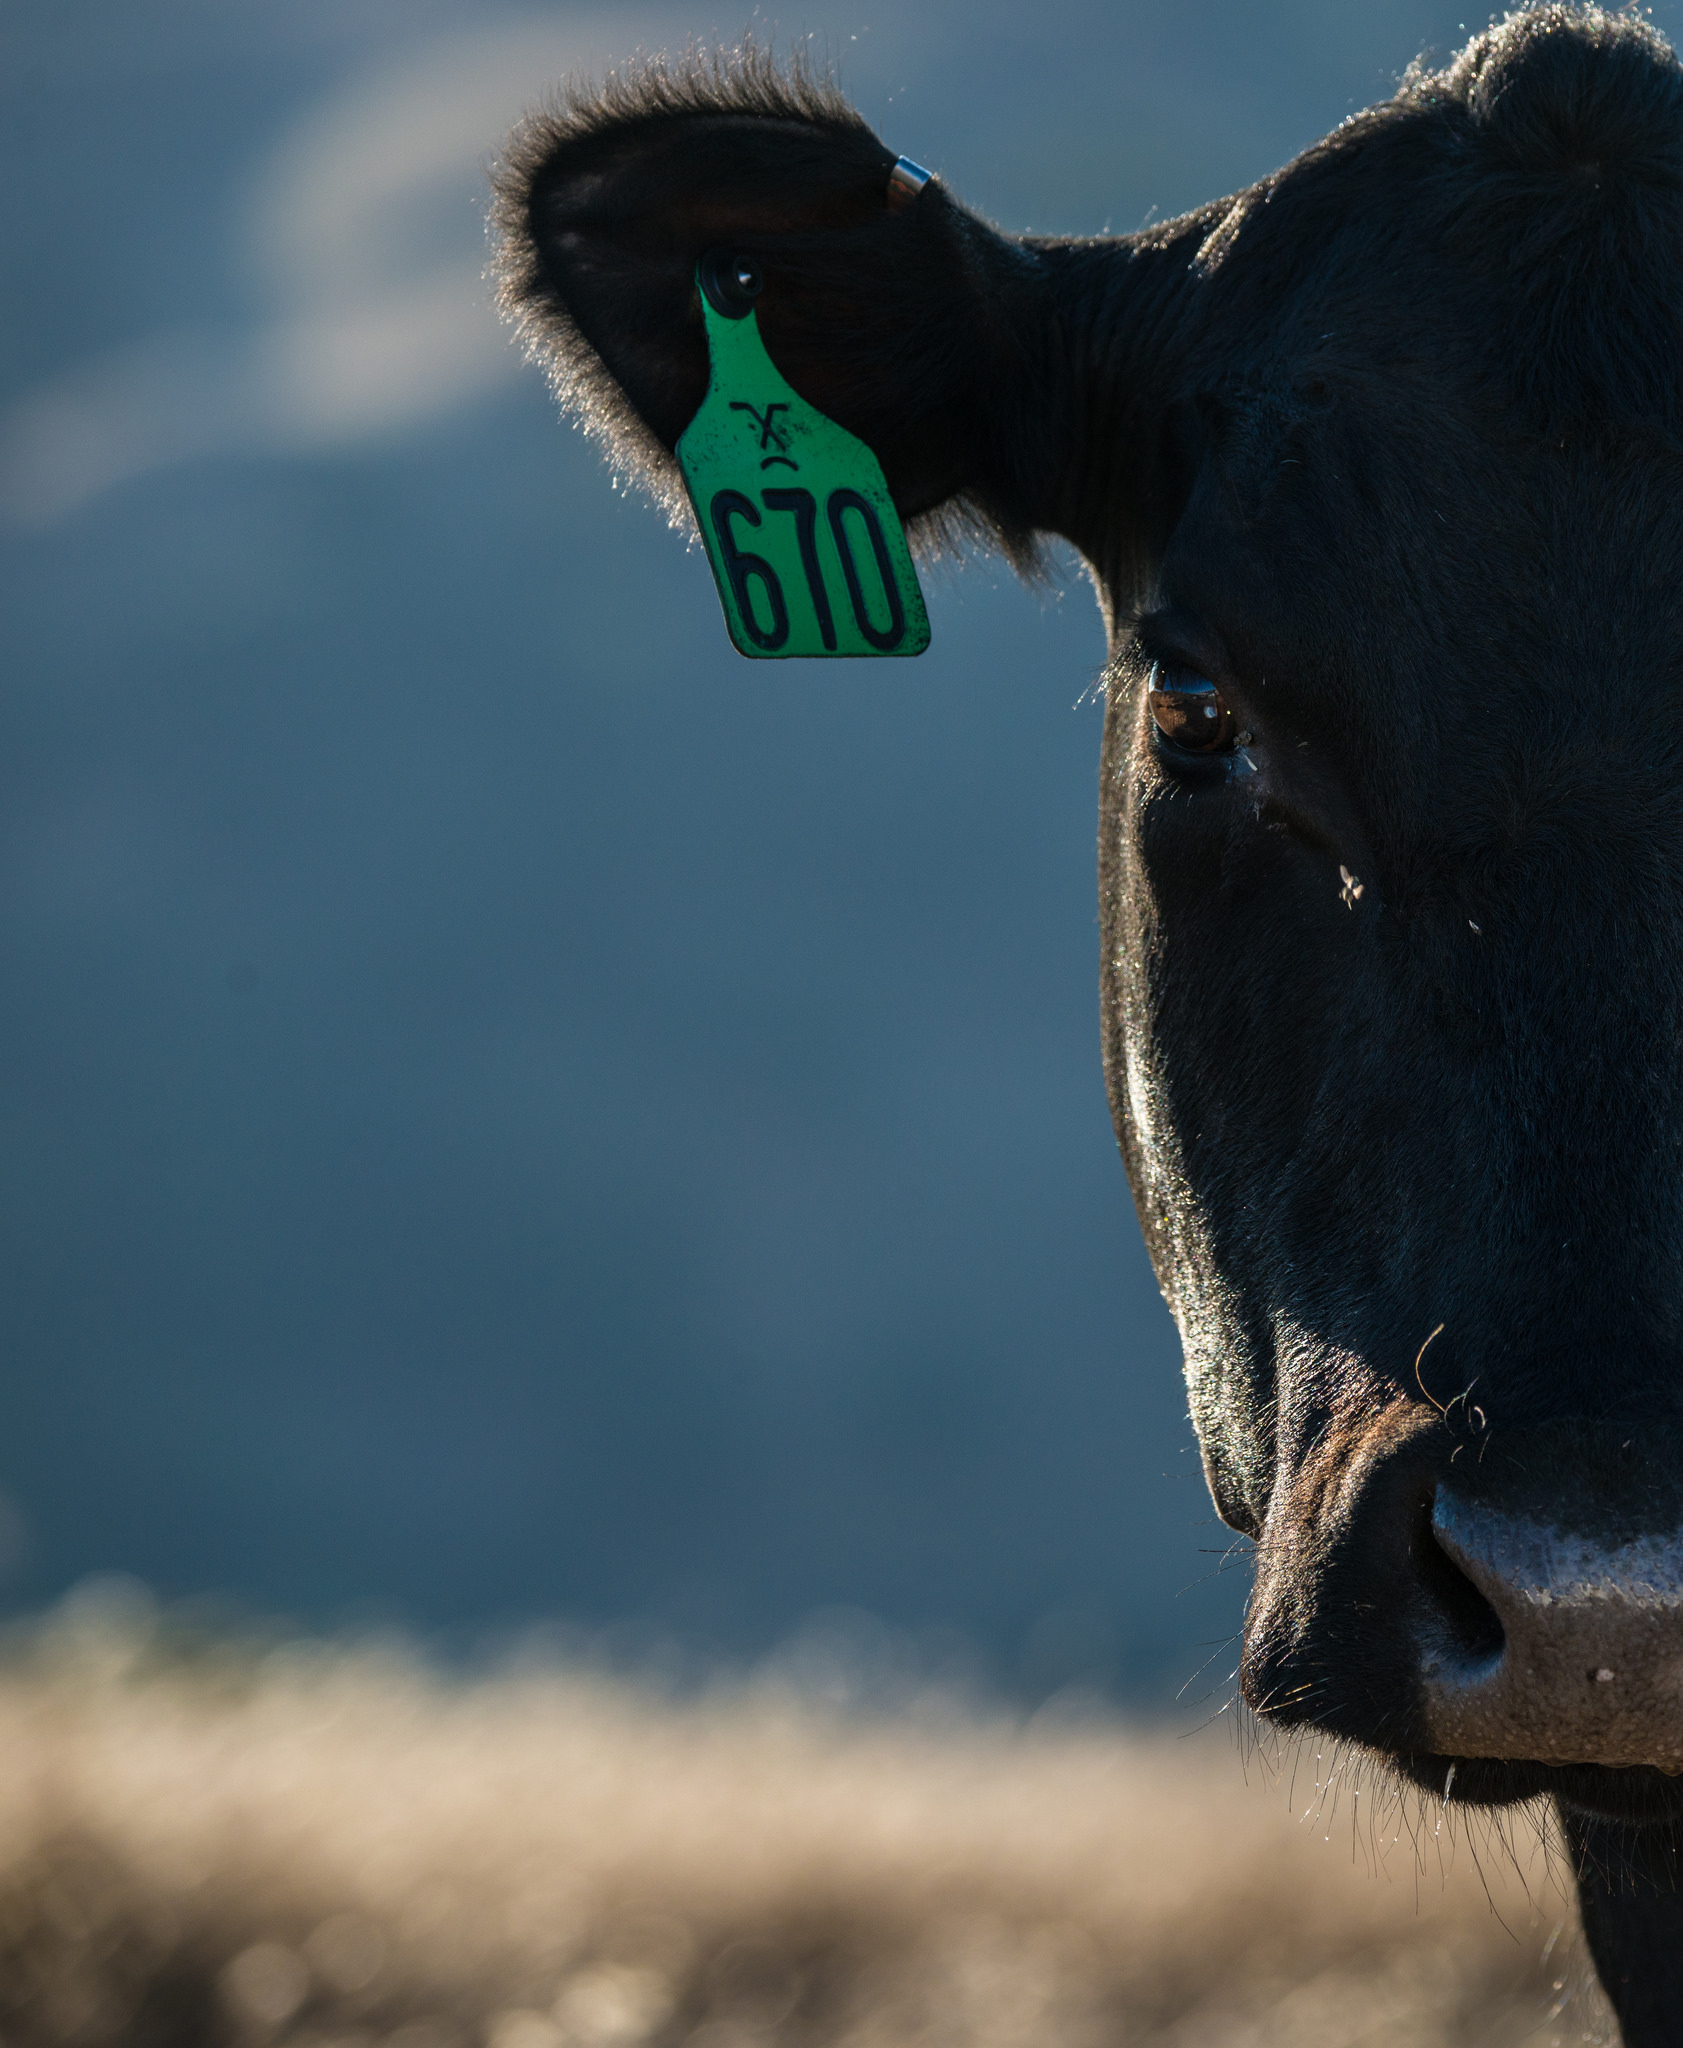 black angus cow with green tag on ear